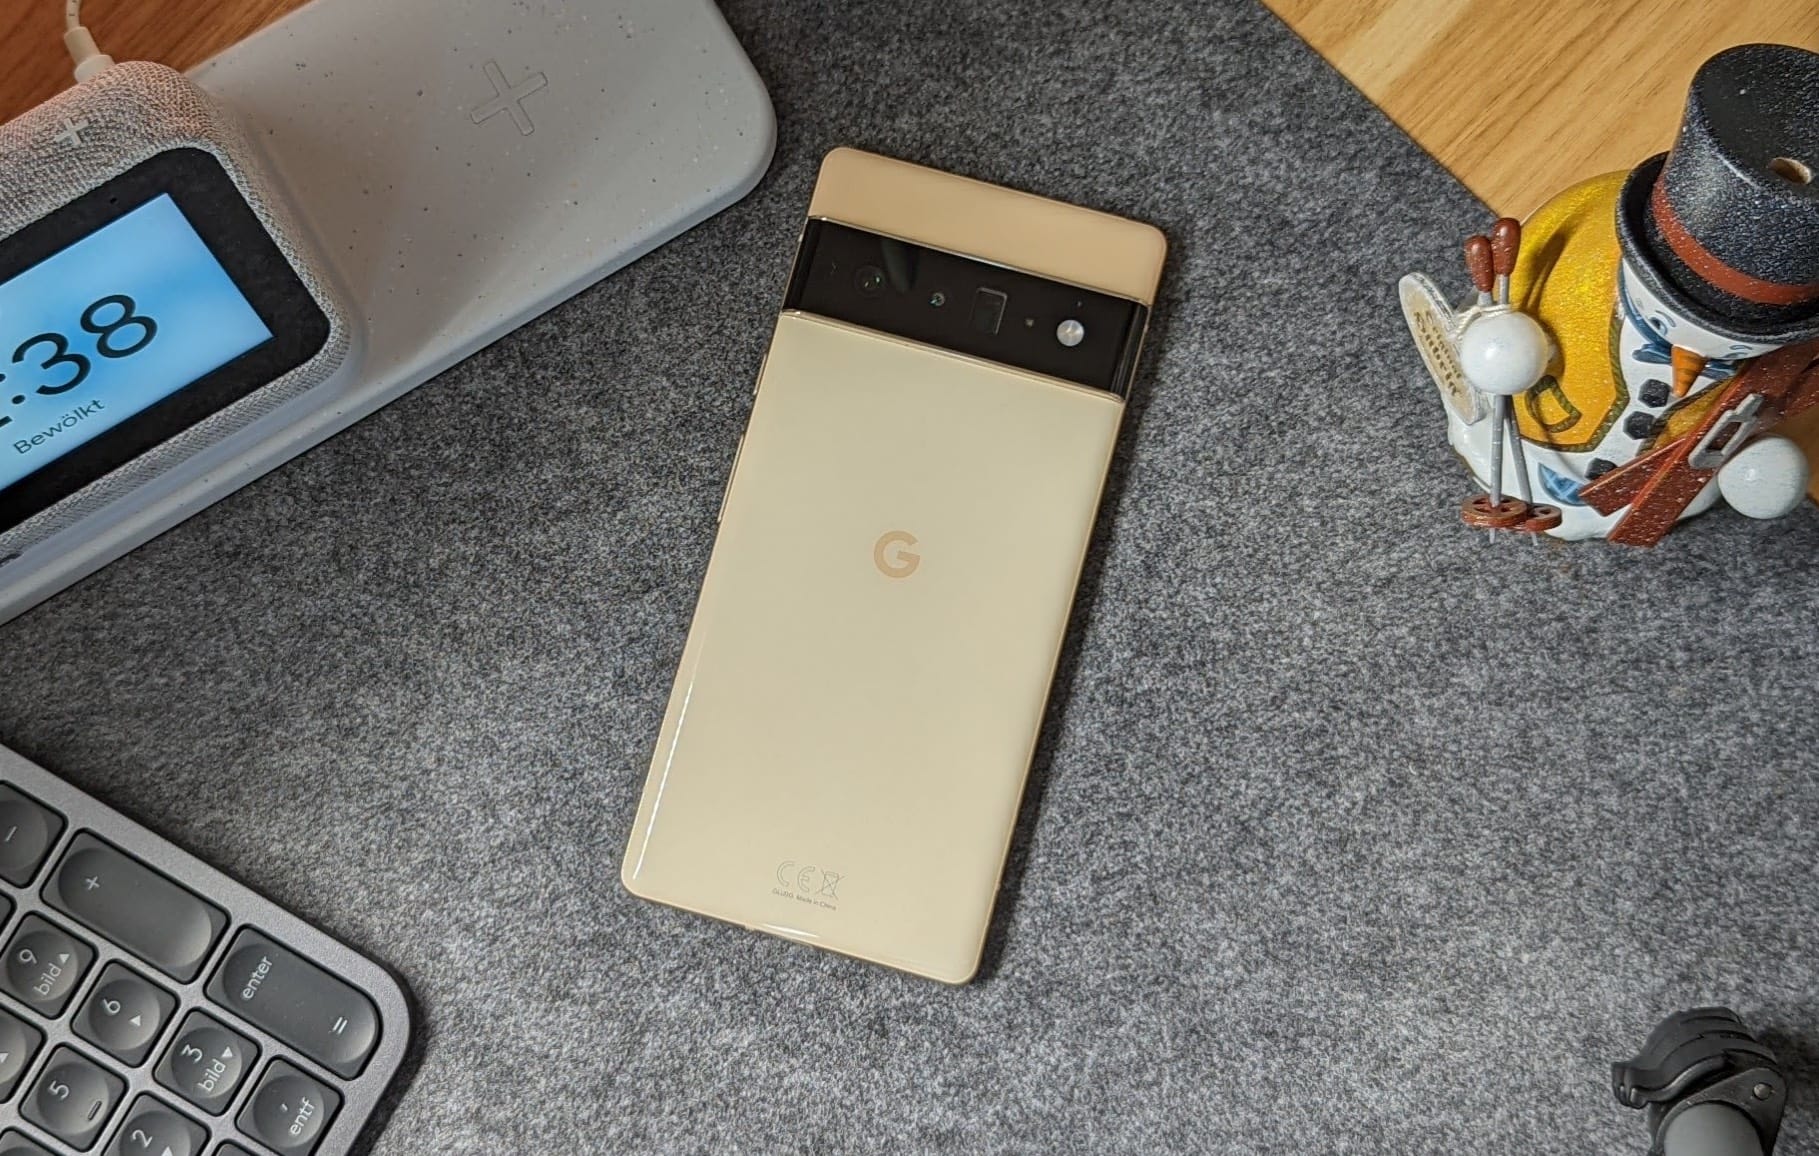 Google cancels the date of the Pixel 6 phone